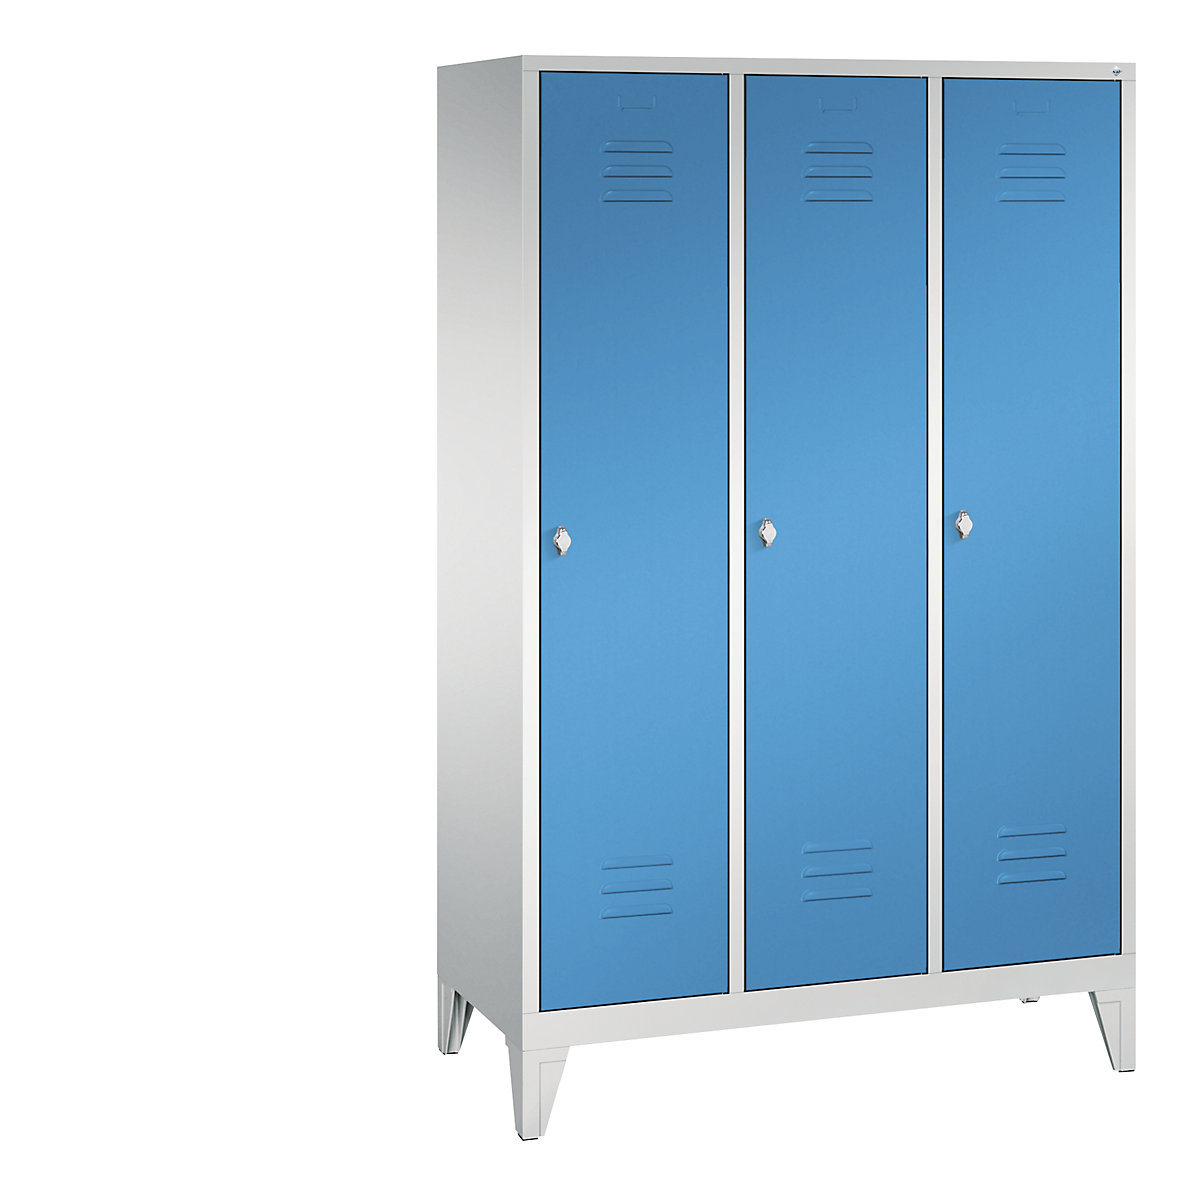 CLASSIC cloakroom locker with feet – C+P, 3 compartments, compartment width 400 mm, light grey / light blue-14